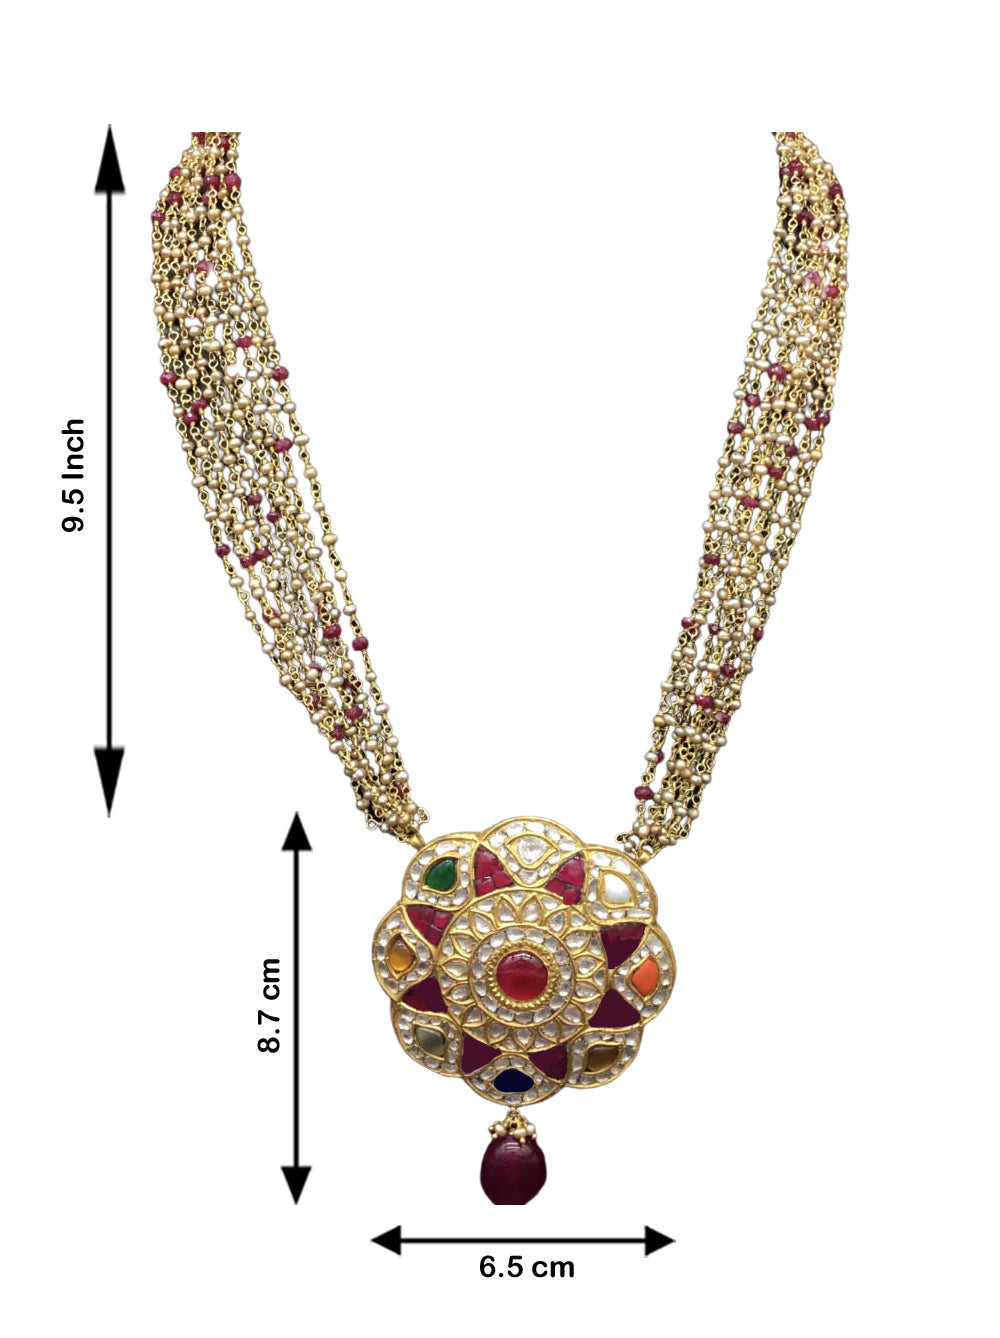 23k Gold and Diamond Polki Navratna floral Pendant with Antique Hyderabadi Pearl Chains